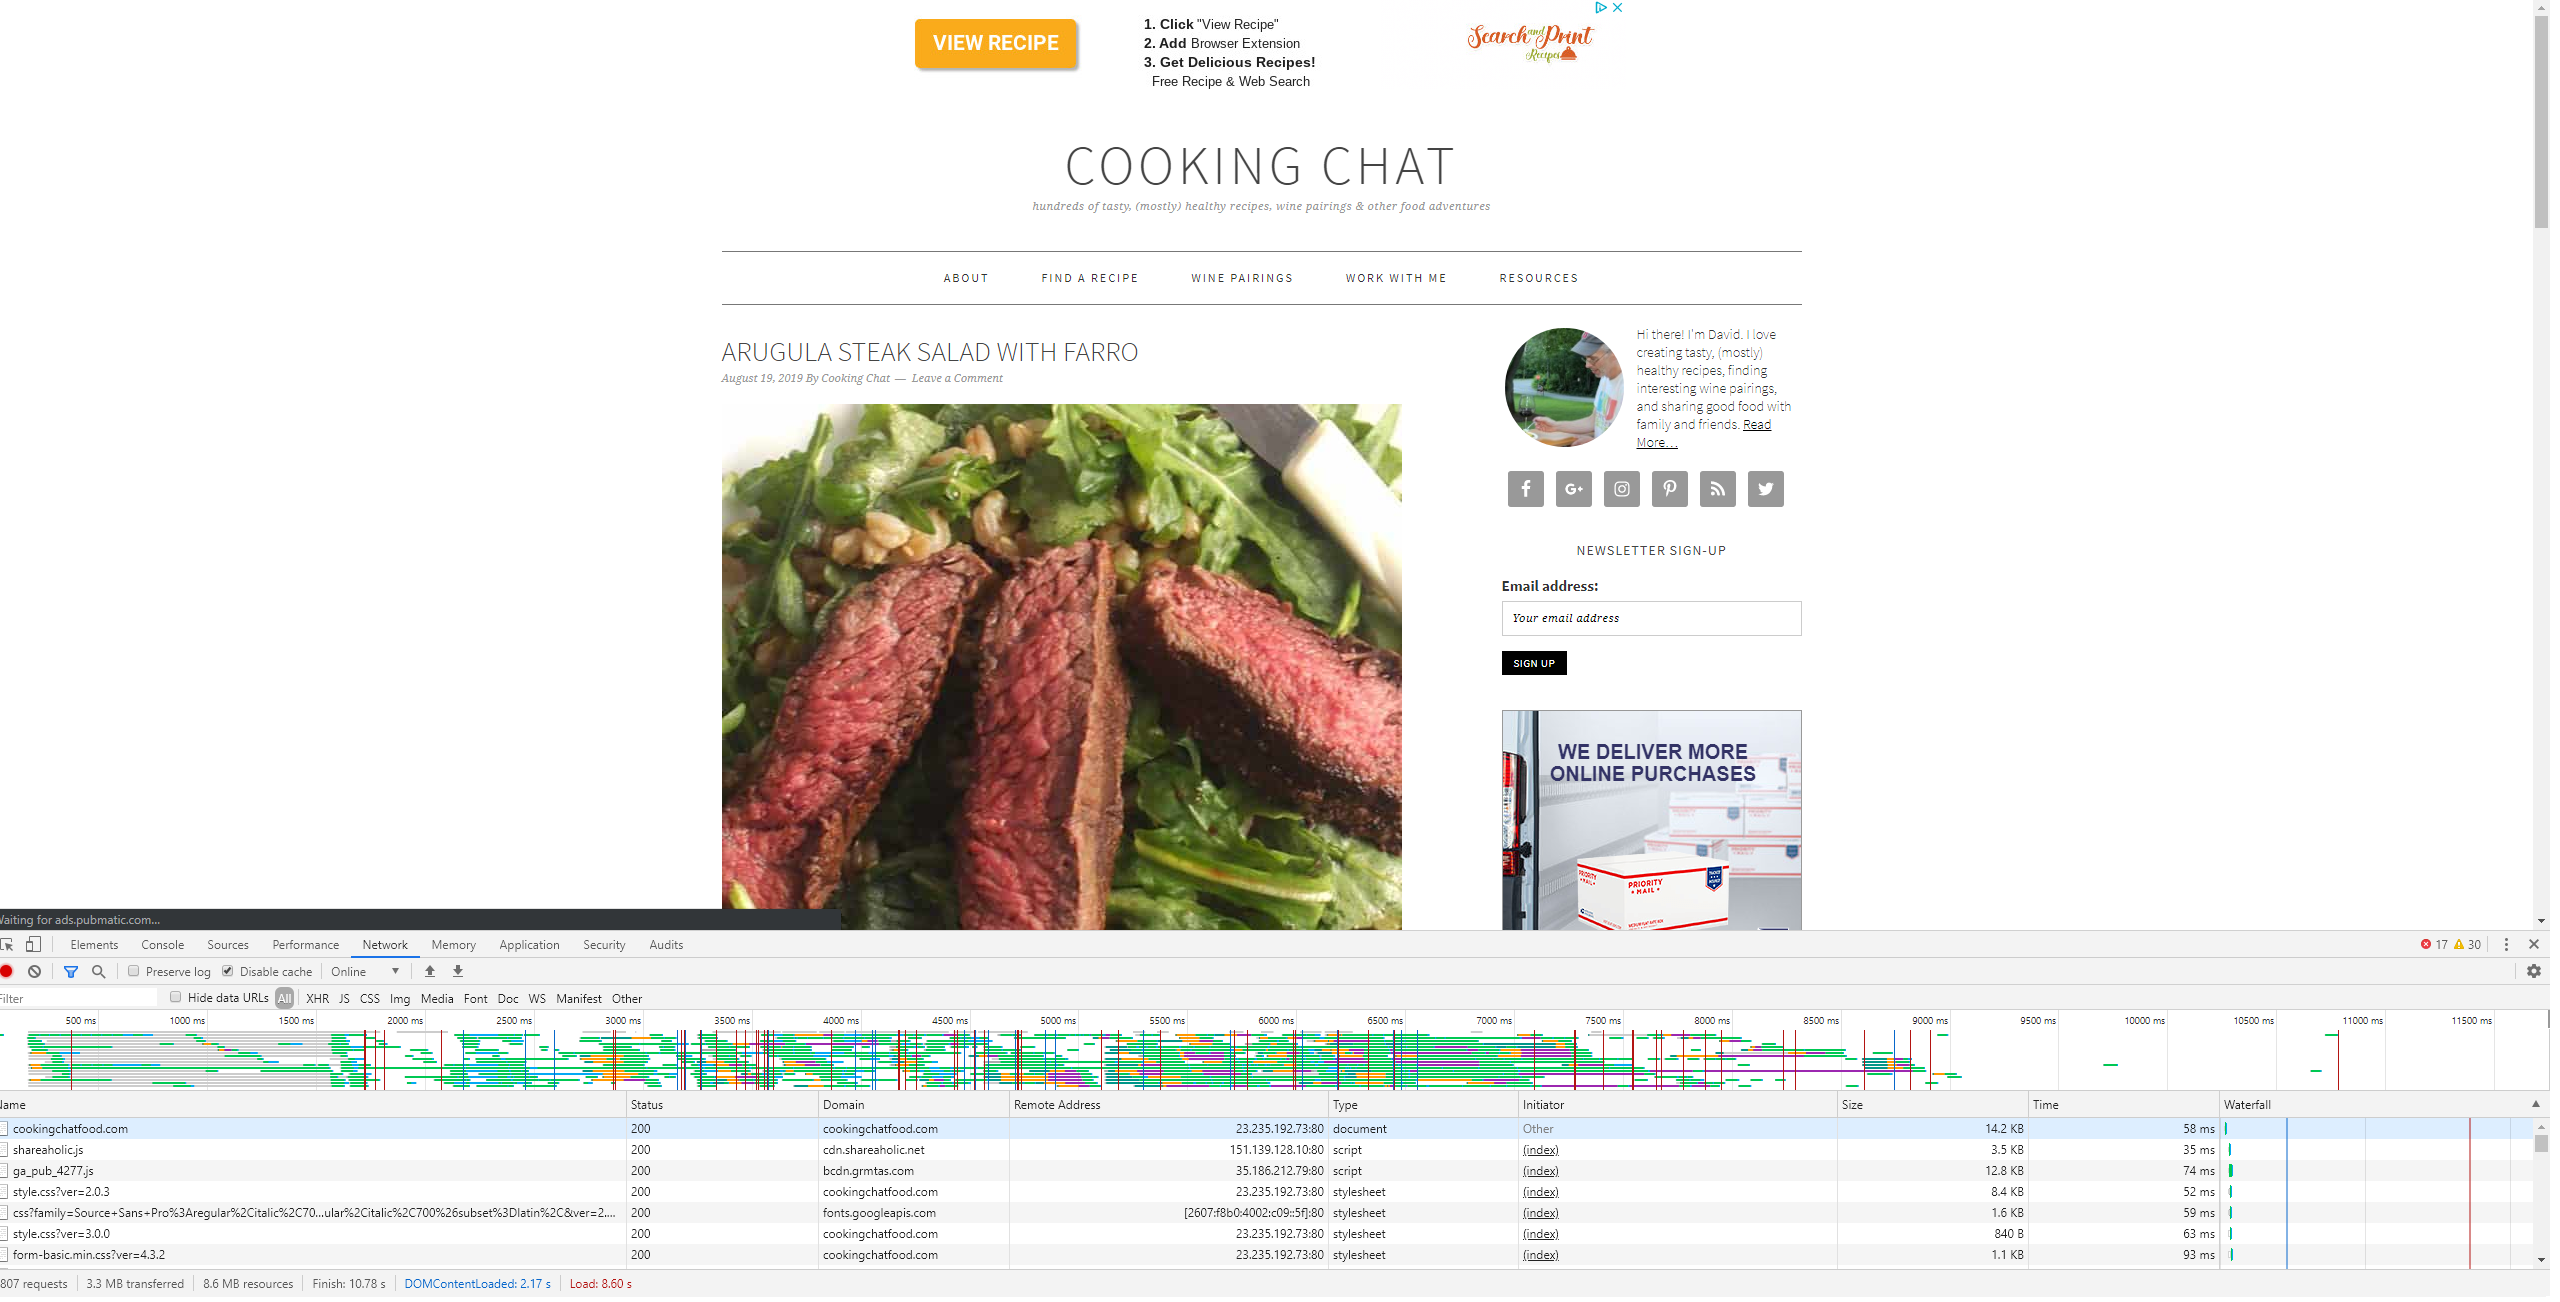 www.cookingchatfood.com Speed Comparison Before